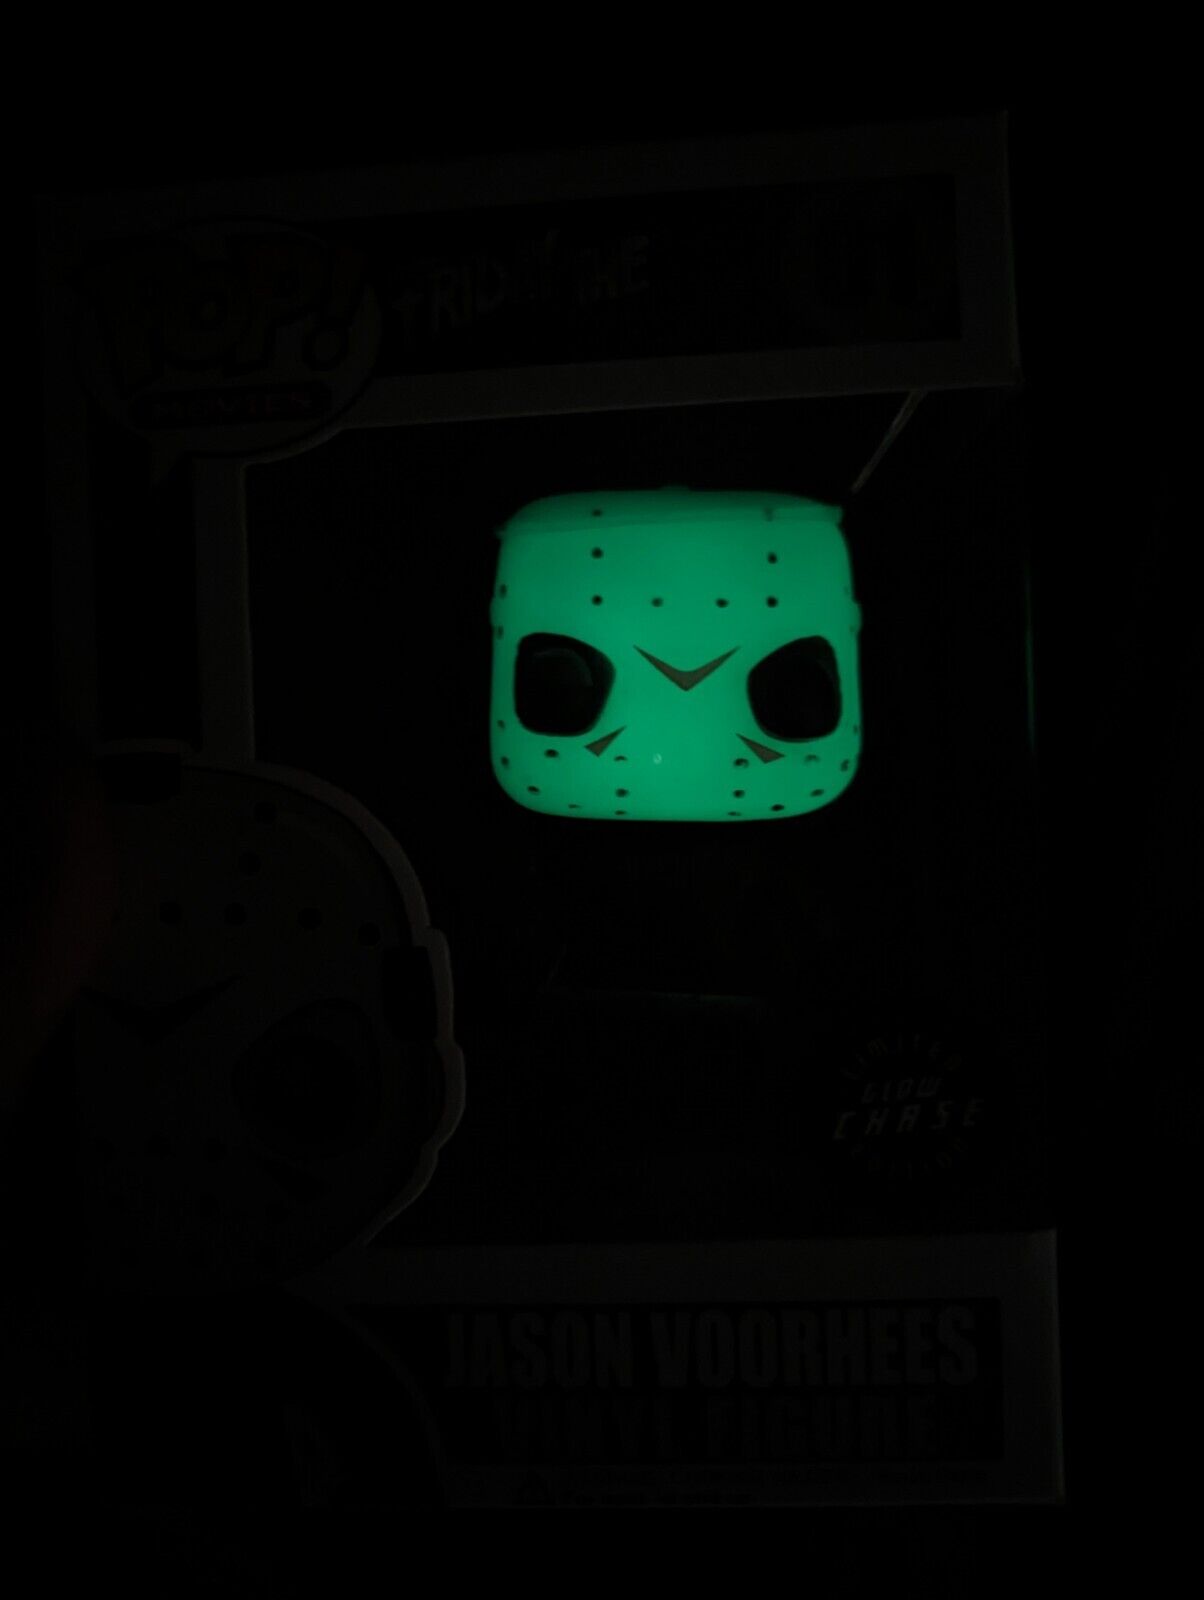 Funko Pop Jason Voorhees 01 Green Glow Chase Friday The 13th